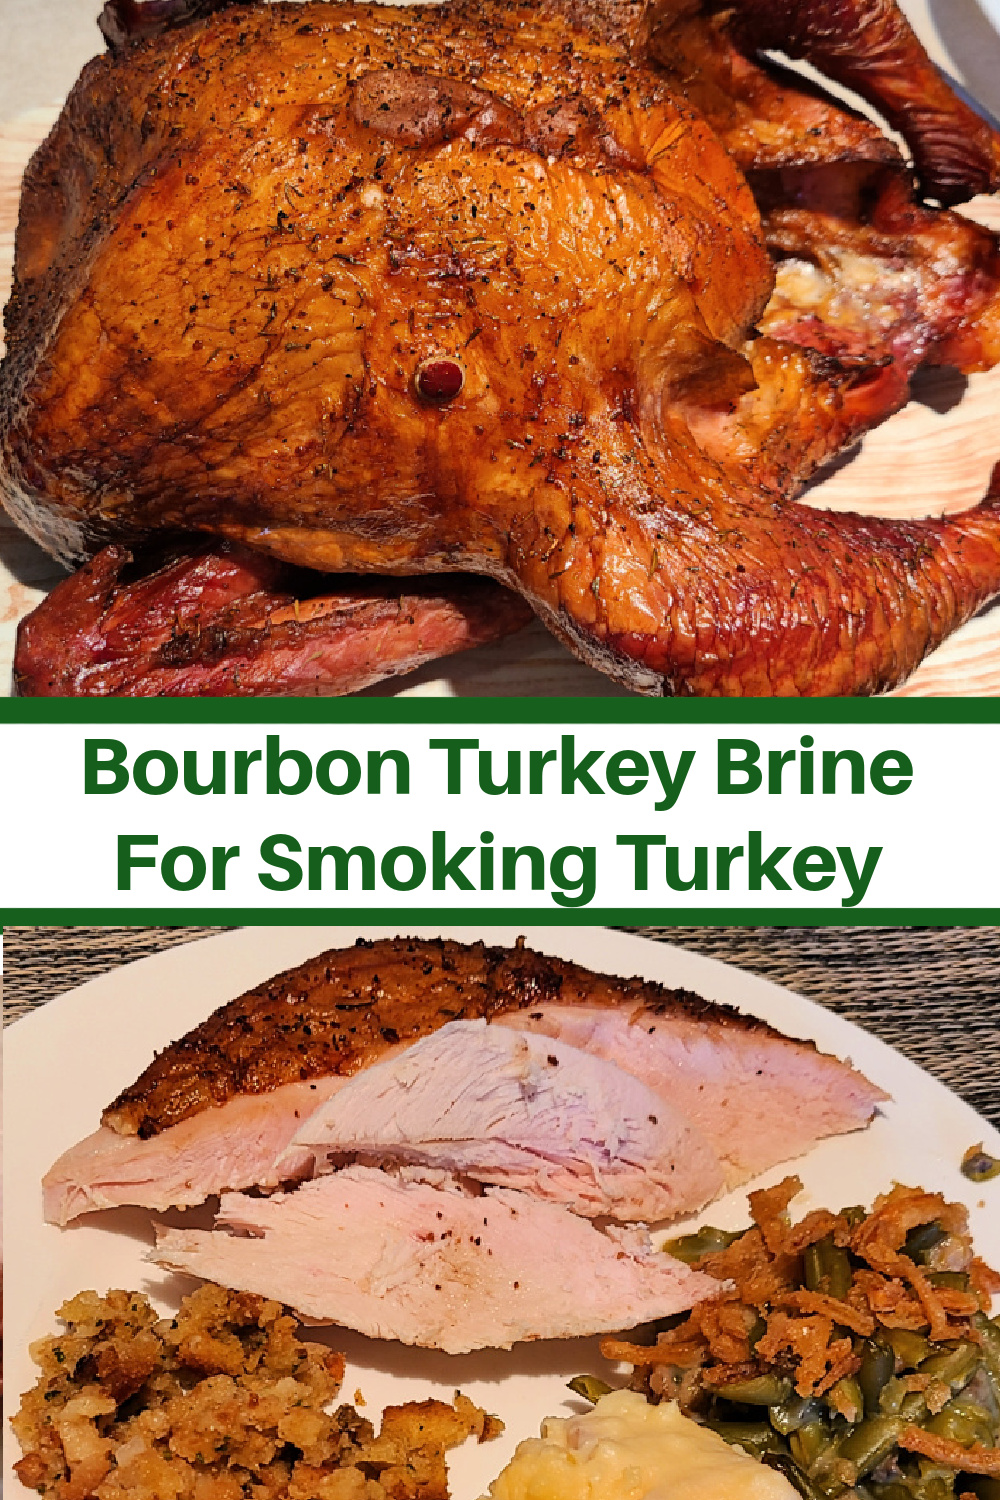 Bourbon Turkey Brine For Smoking Turkey! Perfect to make with Jim Beam Apple Bourbon, plus fruit in the brine and a butter injection! This bourbon brined turkey makes for perfect Thanksgiving dinner!